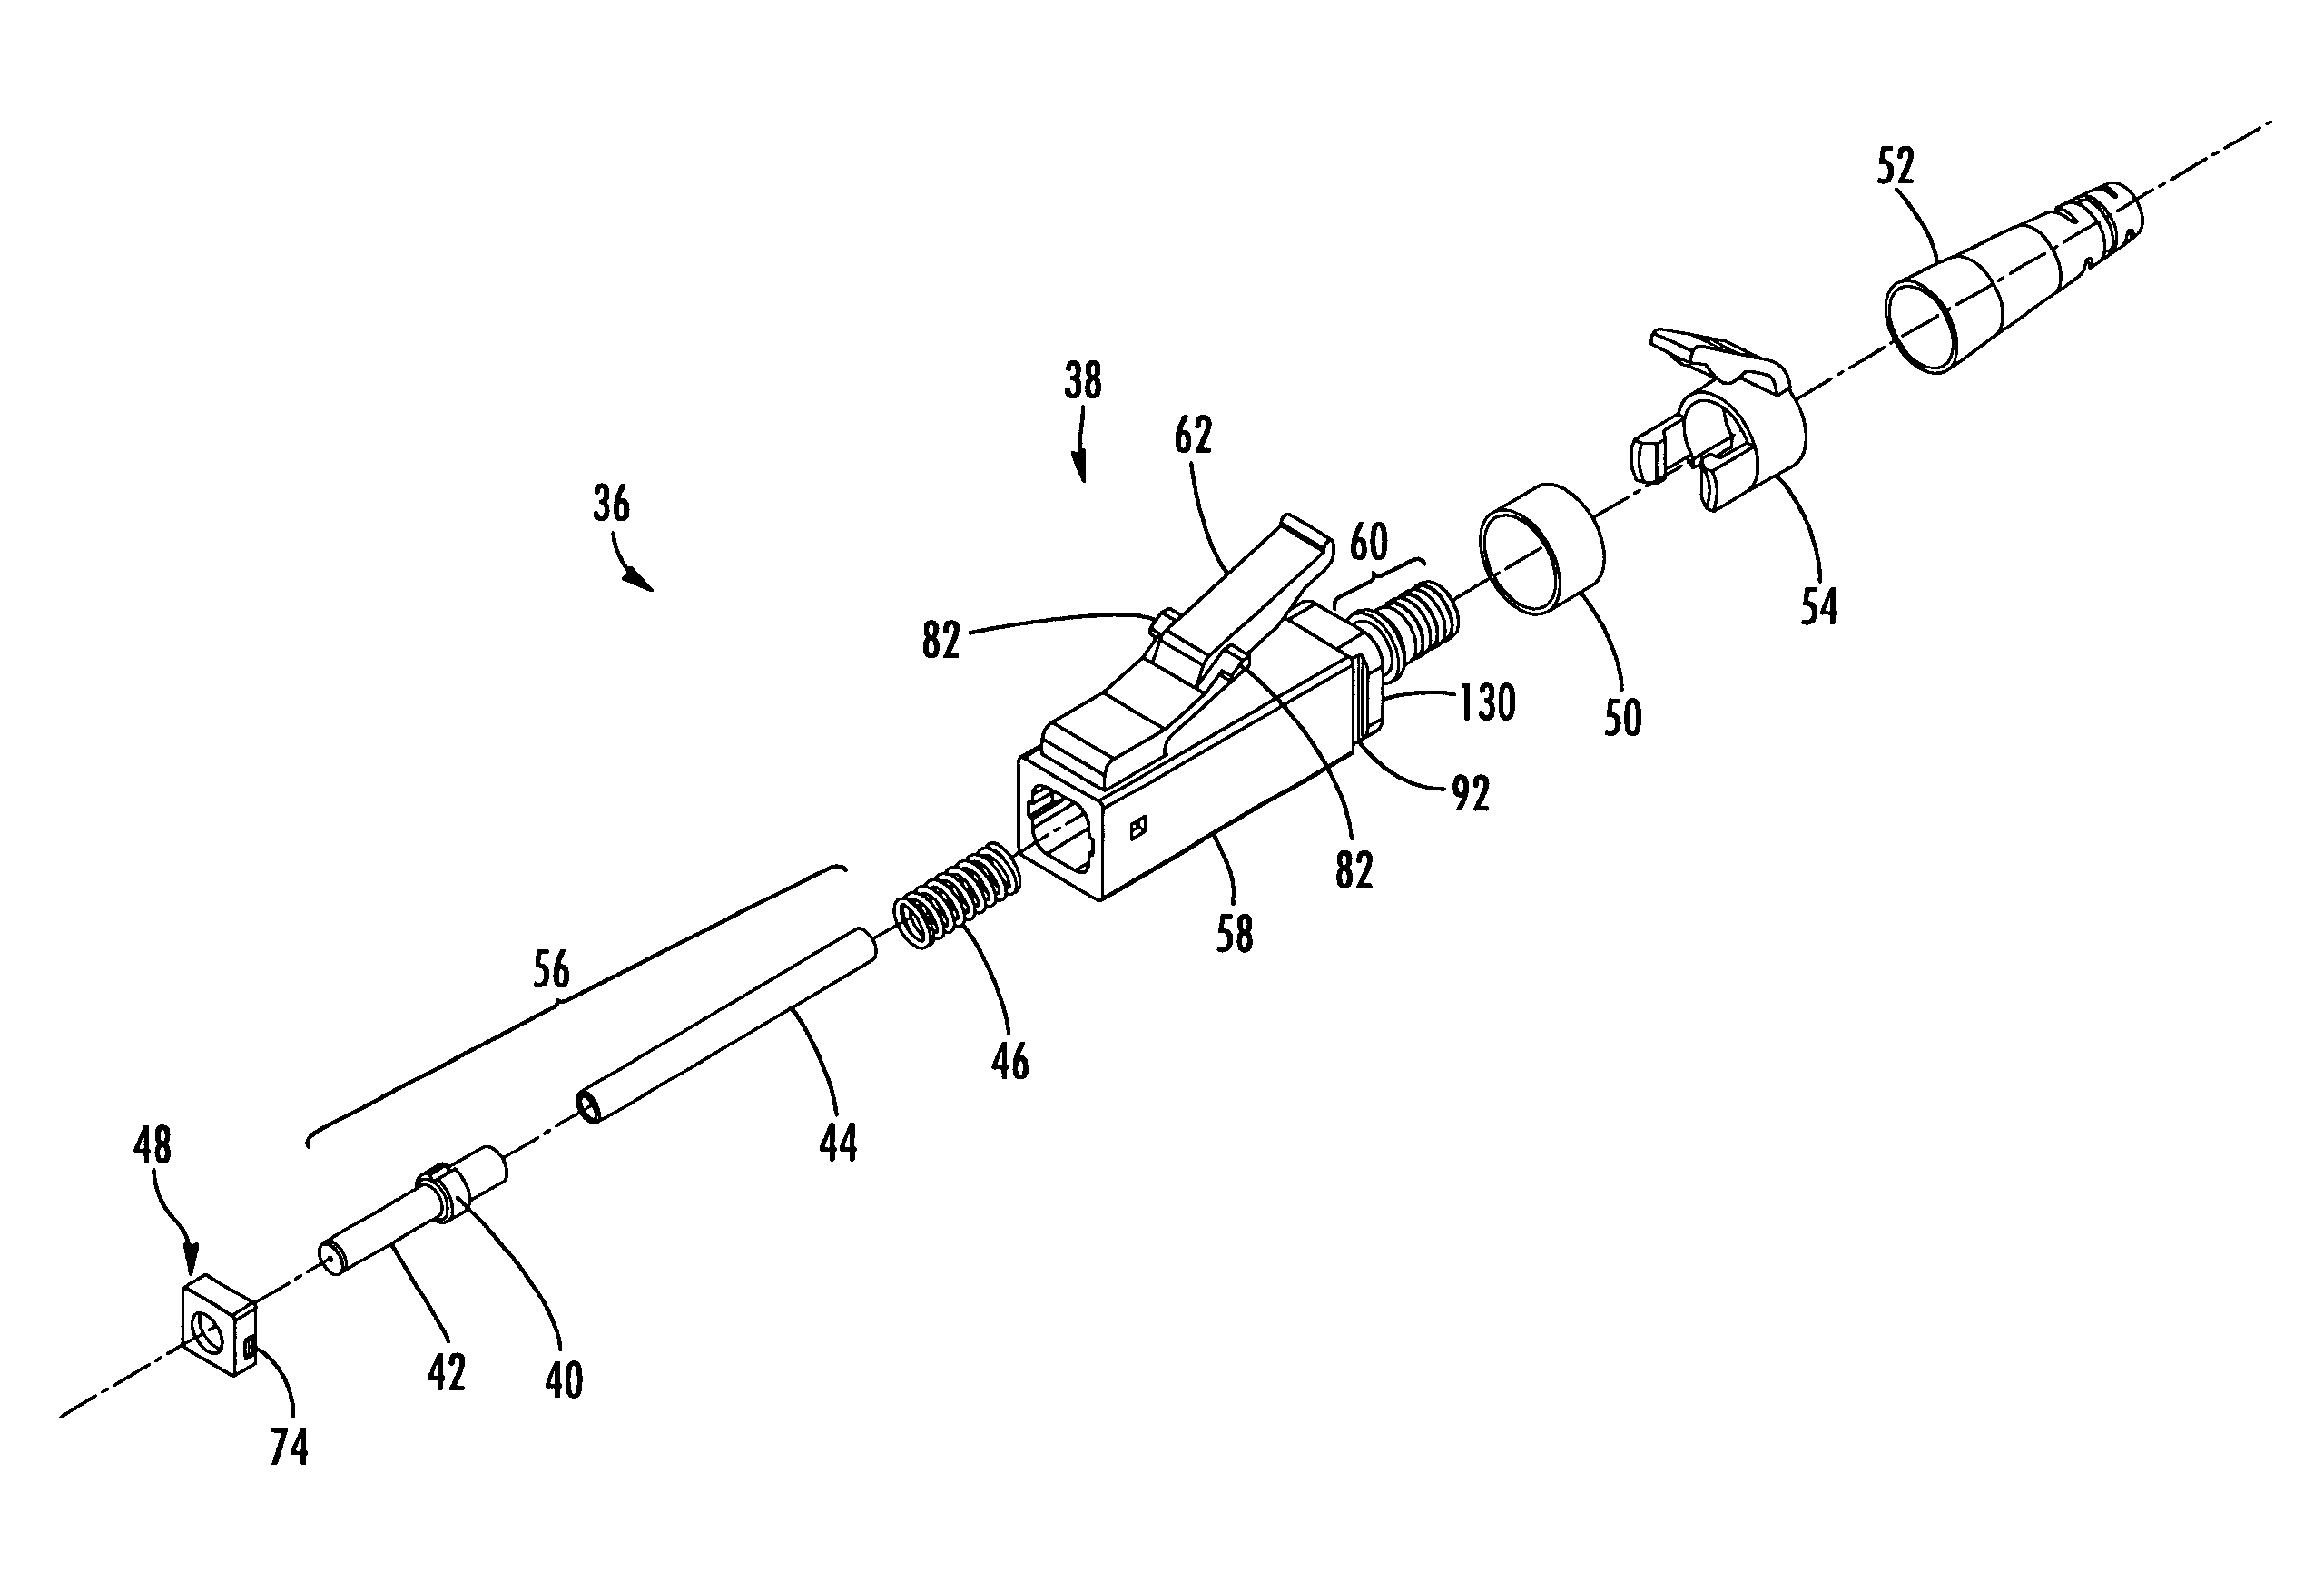 Optical fiber connector and method of assembly